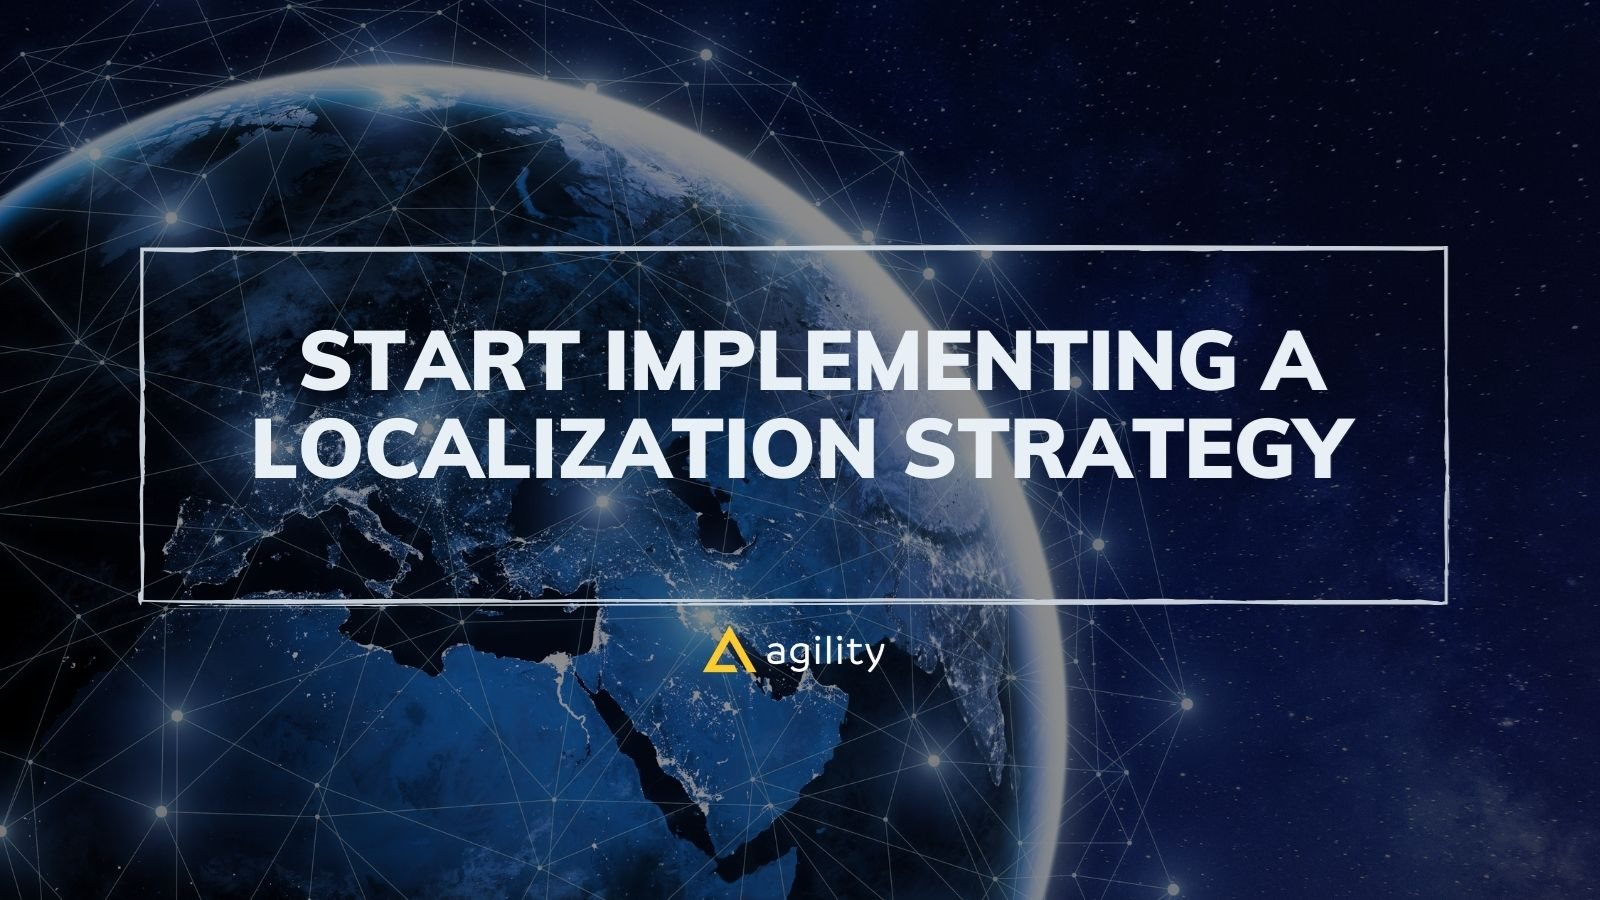  Start Implementing a Localization Strategy